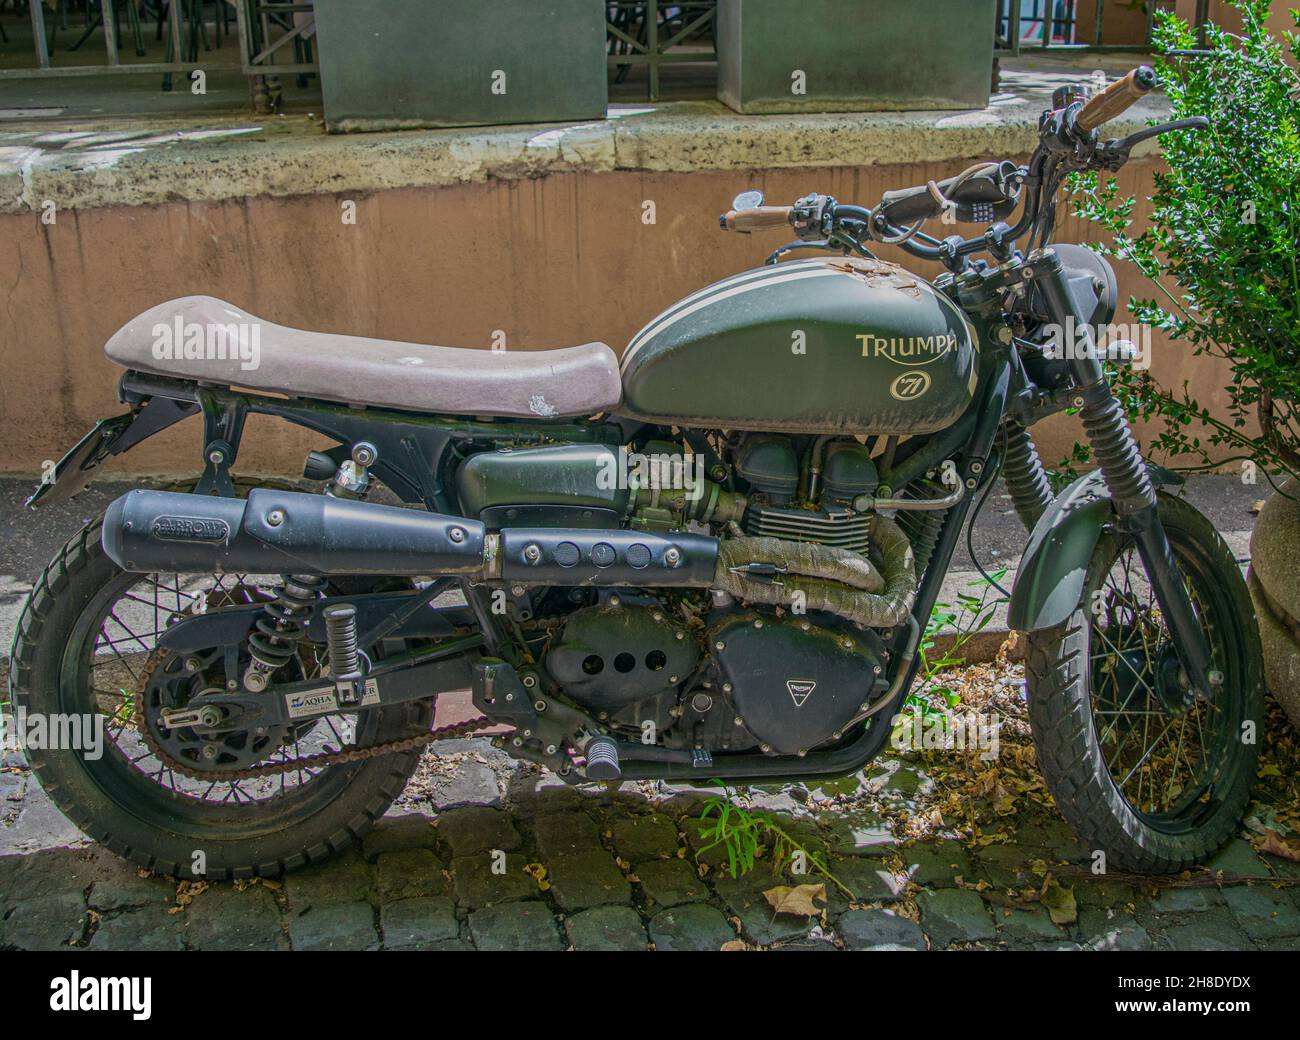 ROME, ITALY - Aug 01, 2019: A vintage Triumph motorcycle in the streets of  Venice, Italy Stock Photo - Alamy